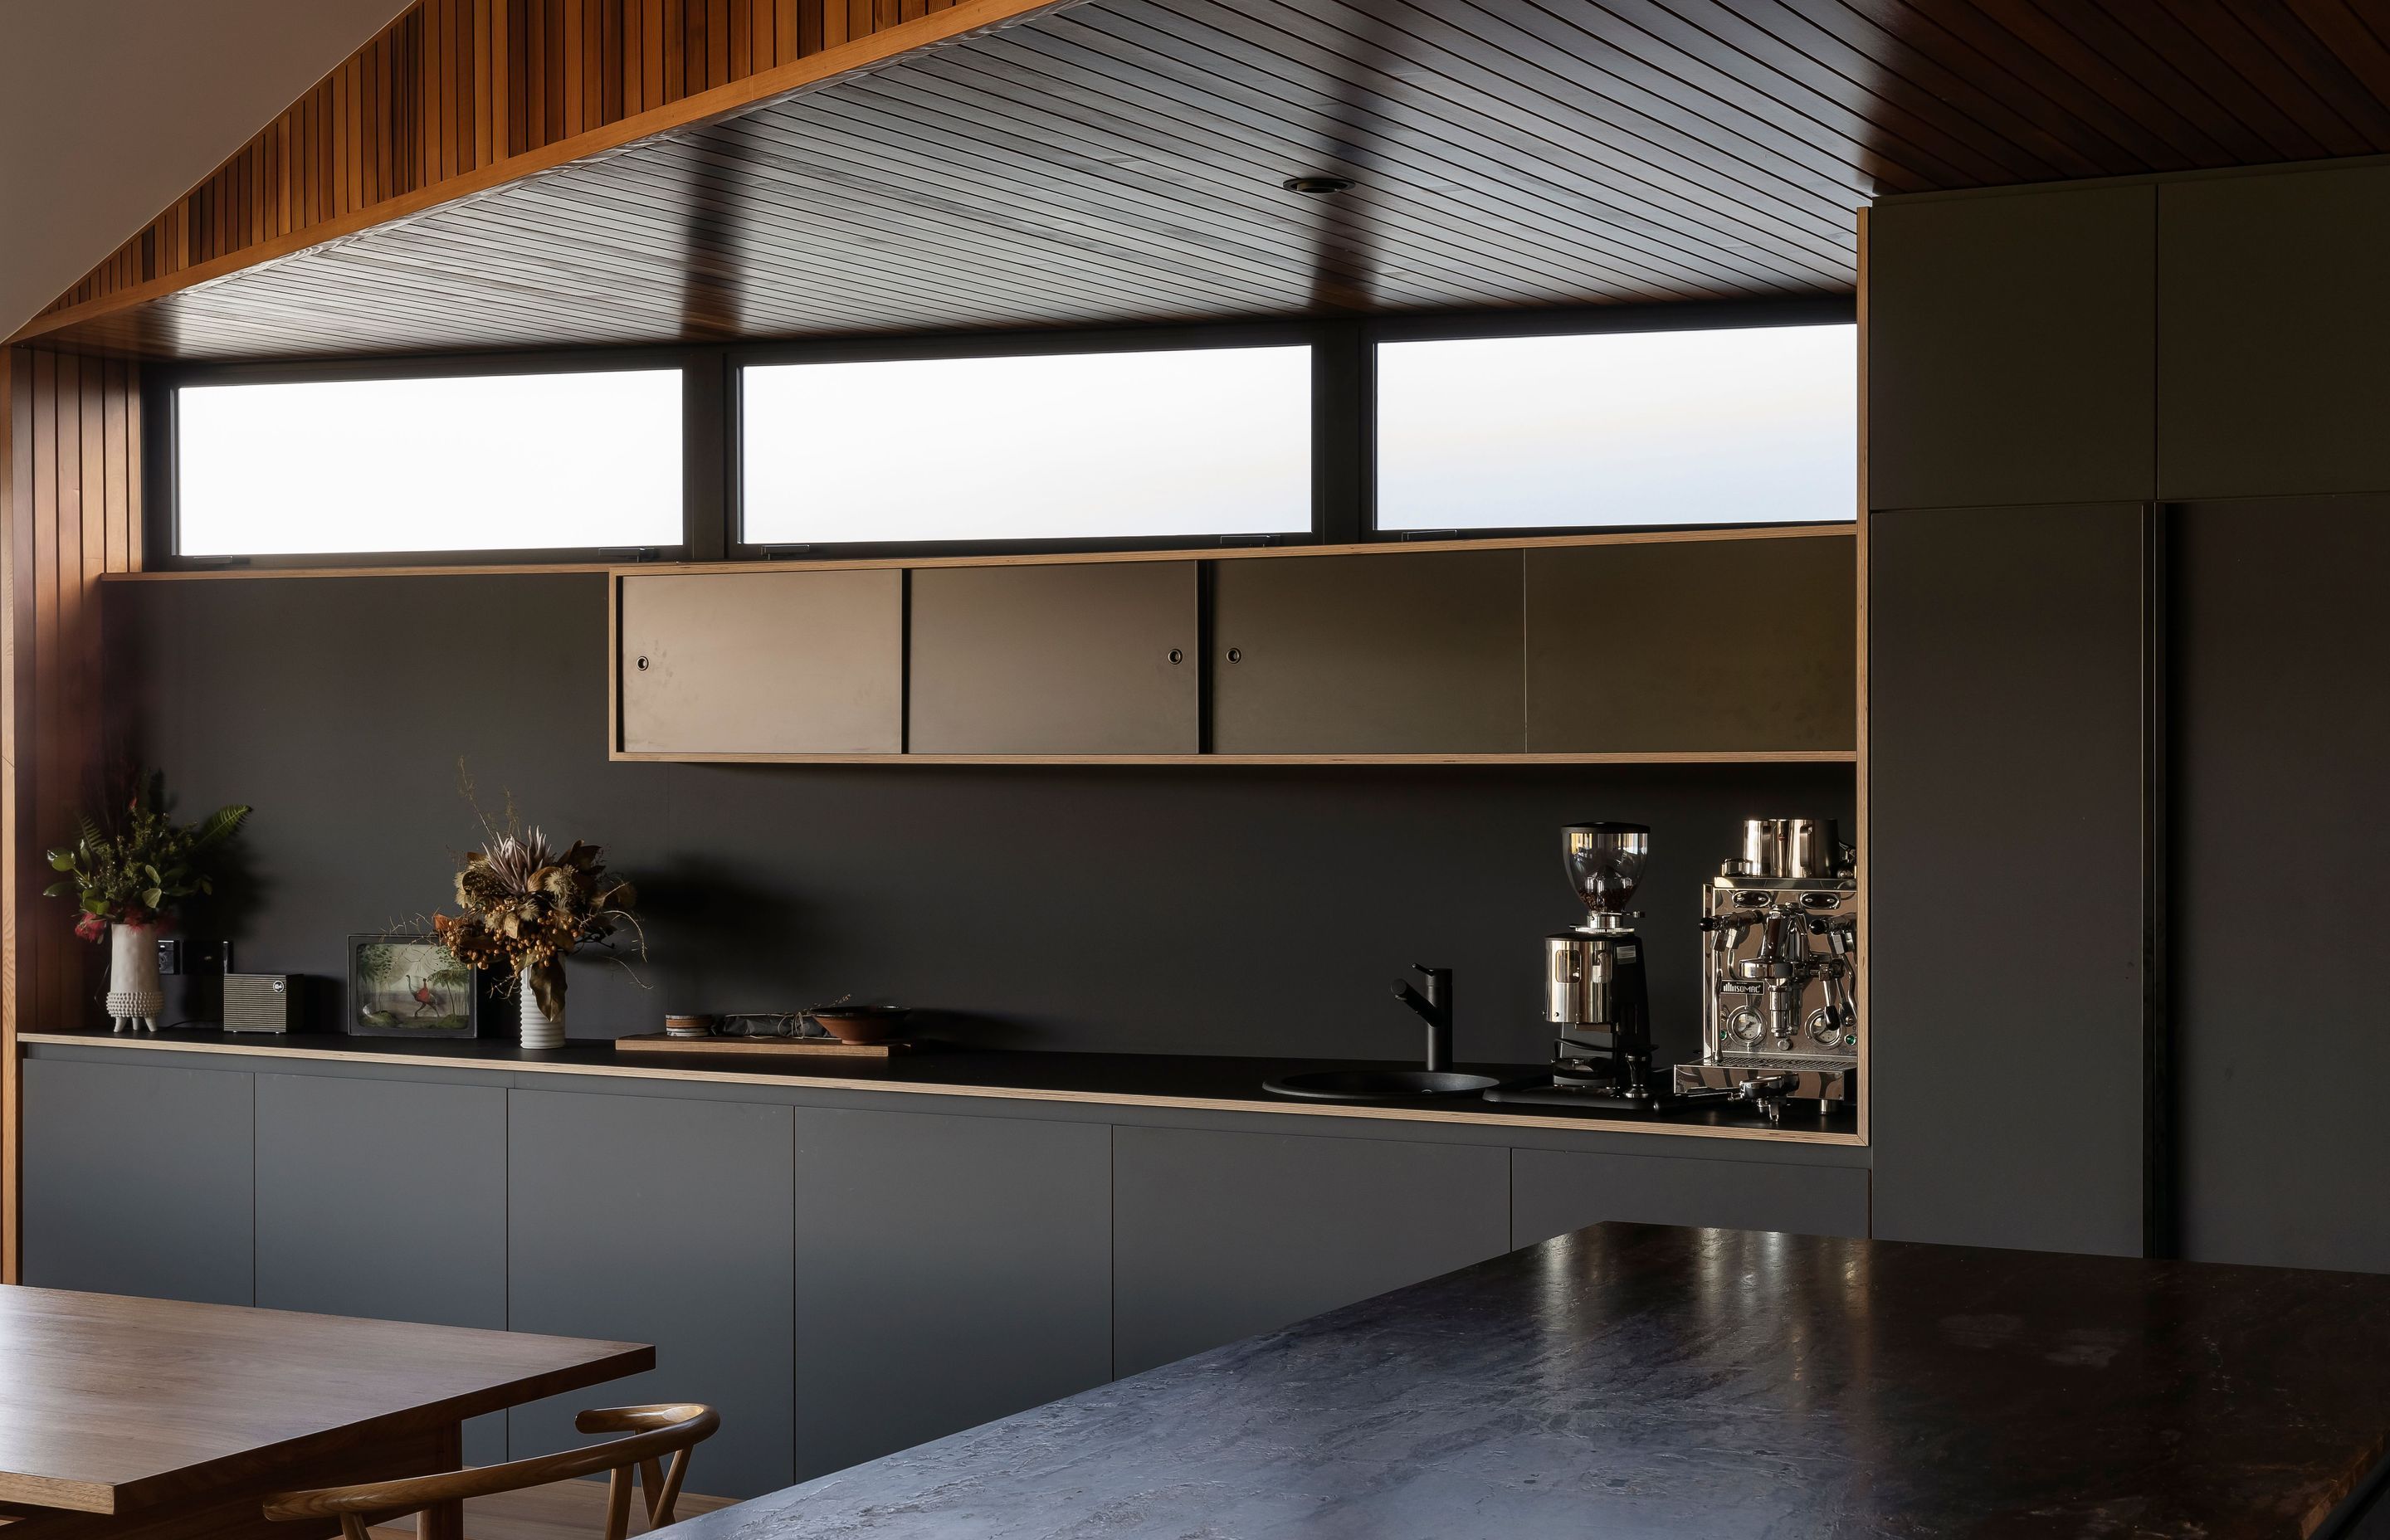 The dark kitchen cabinetry juxtaposes the warm and light interior.